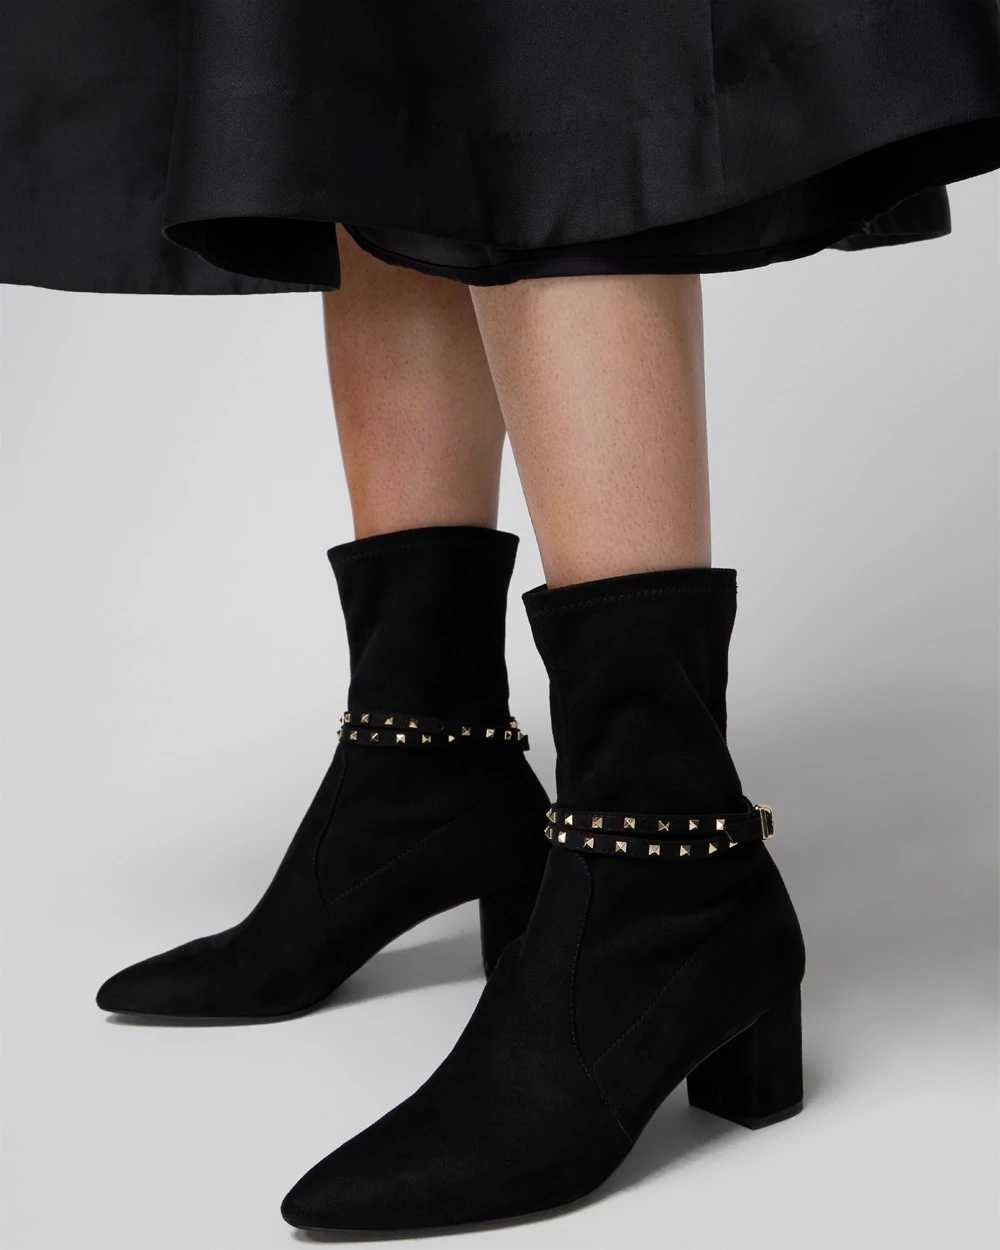 Removable Strap Suede Sock Boot click to view larger image.